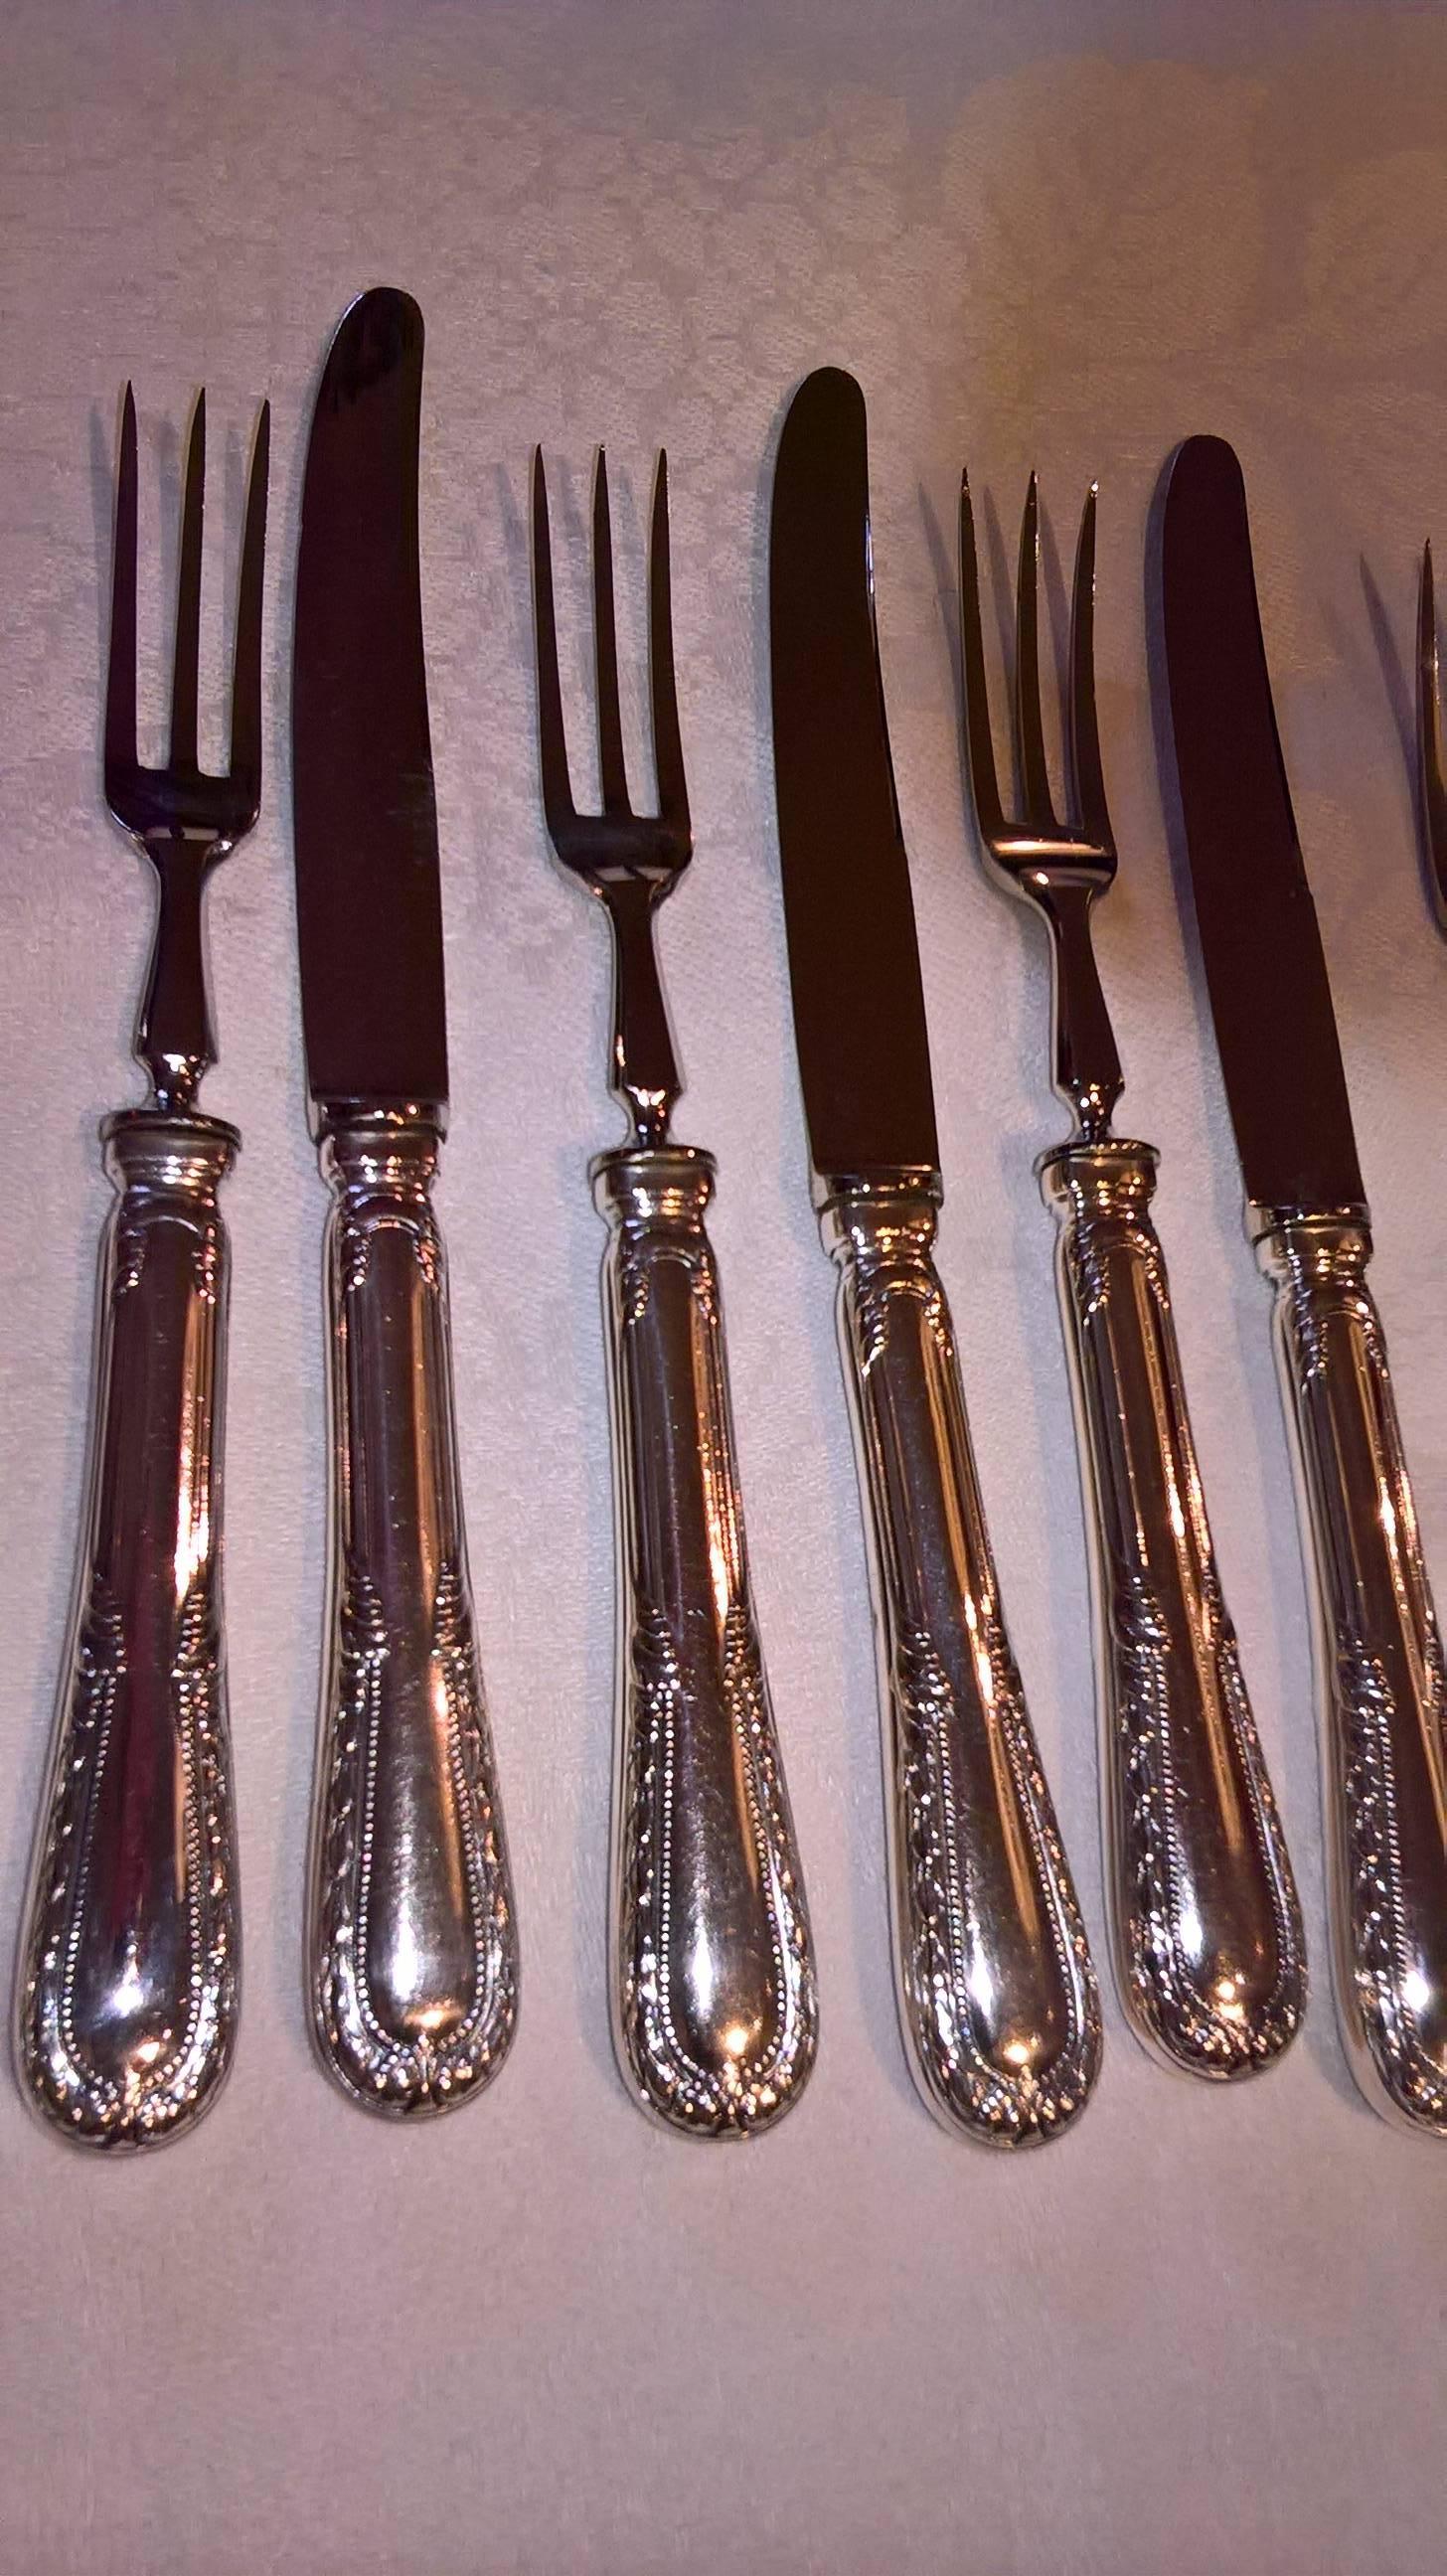 German dessert fruit set of six knives and six forks from 1890. Decor Ludwig XVI. This decor ist still available at Koch and  Bergfeld for the complete menue set.
Handmade by Koch & Bergfeld Bremen/Germany. All pieces stamped 800 and hallmark